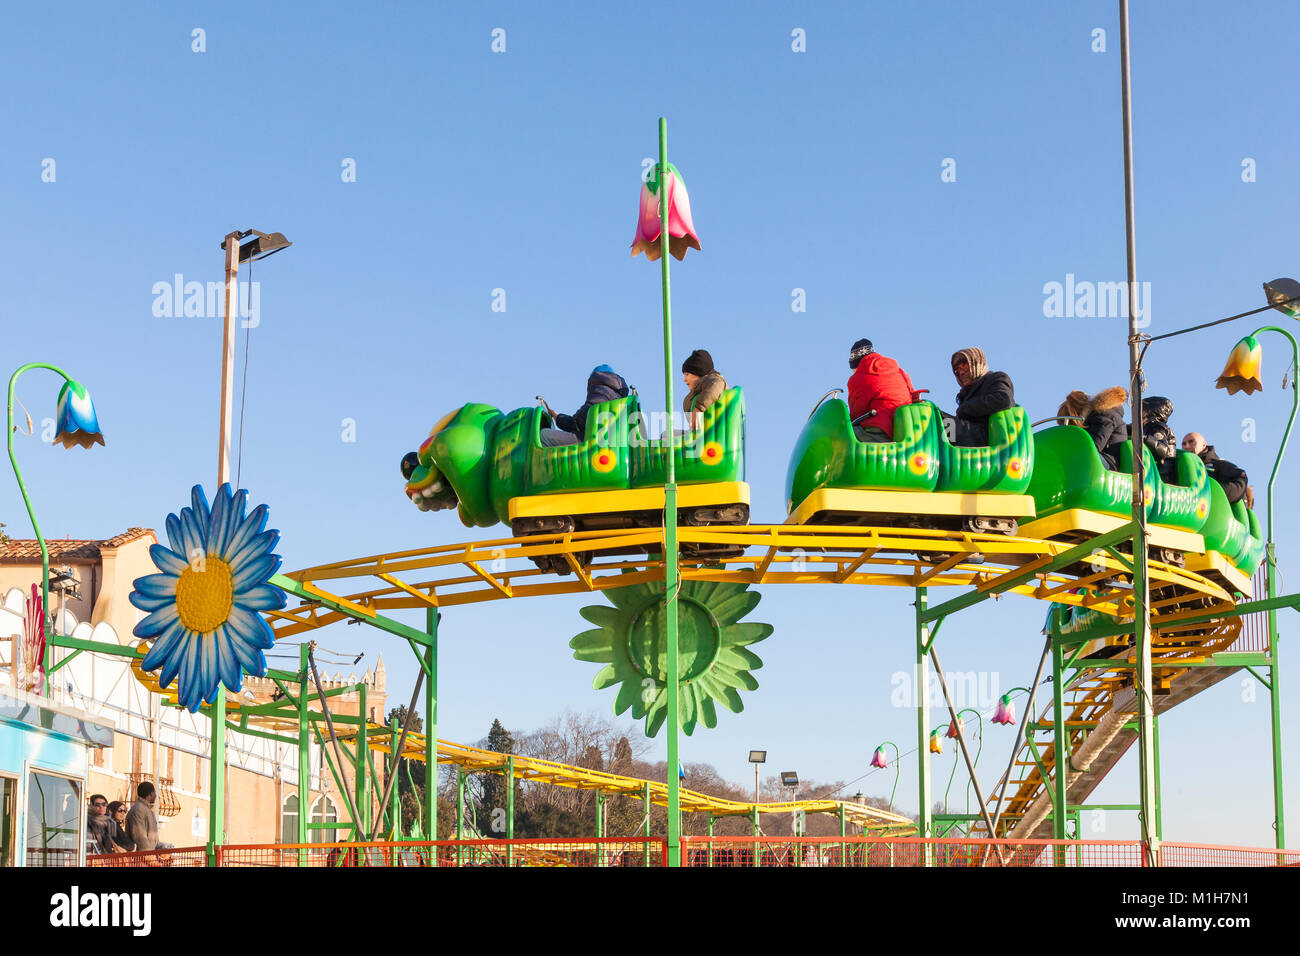 Parents and young children on a Wacky Worm Roller Coaster  at a seasonal winter funfair in Castello, Venice, Italy showing the track against a blue sk Stock Photo